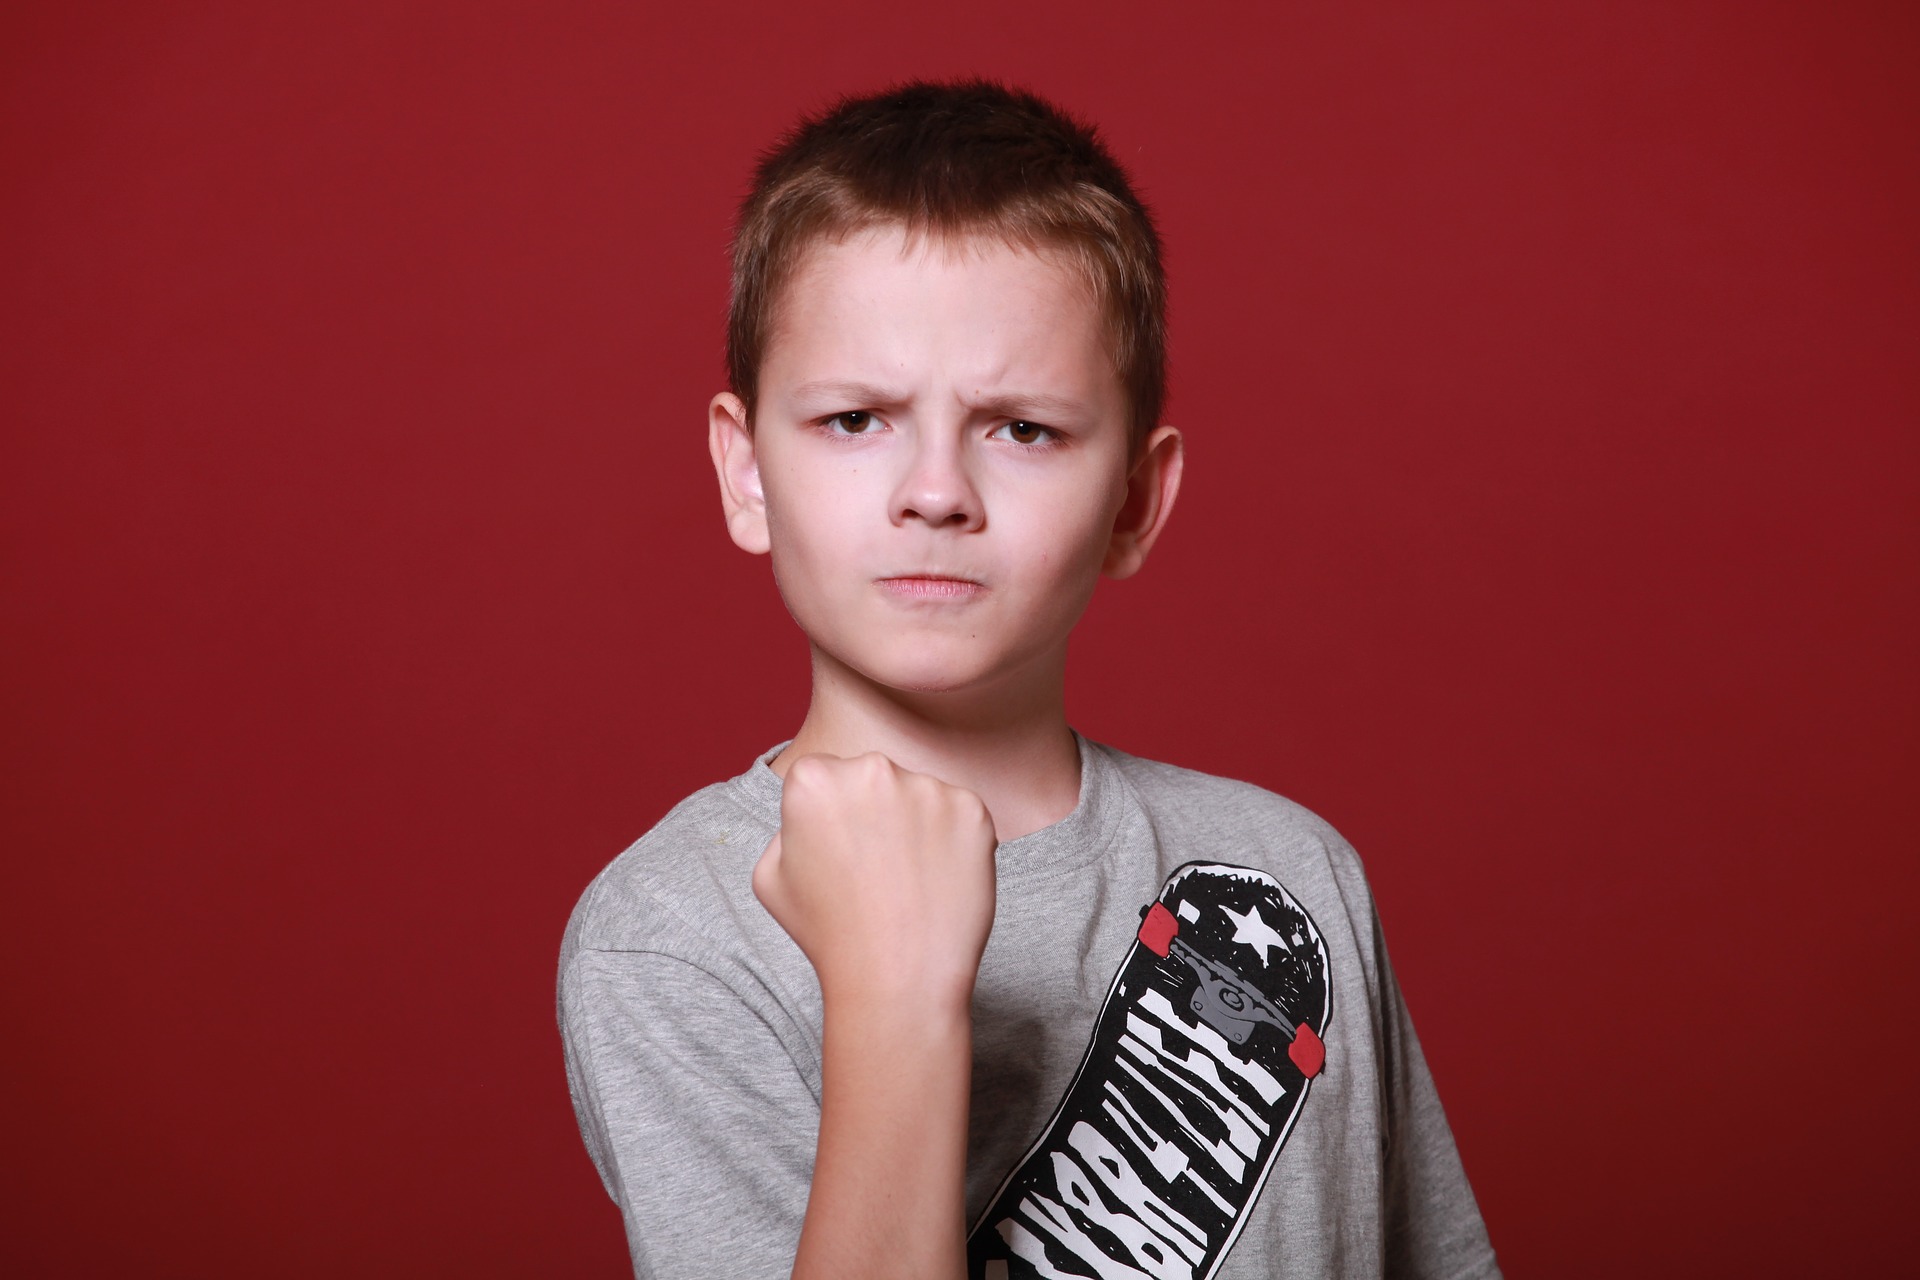 Anger and aggression in children